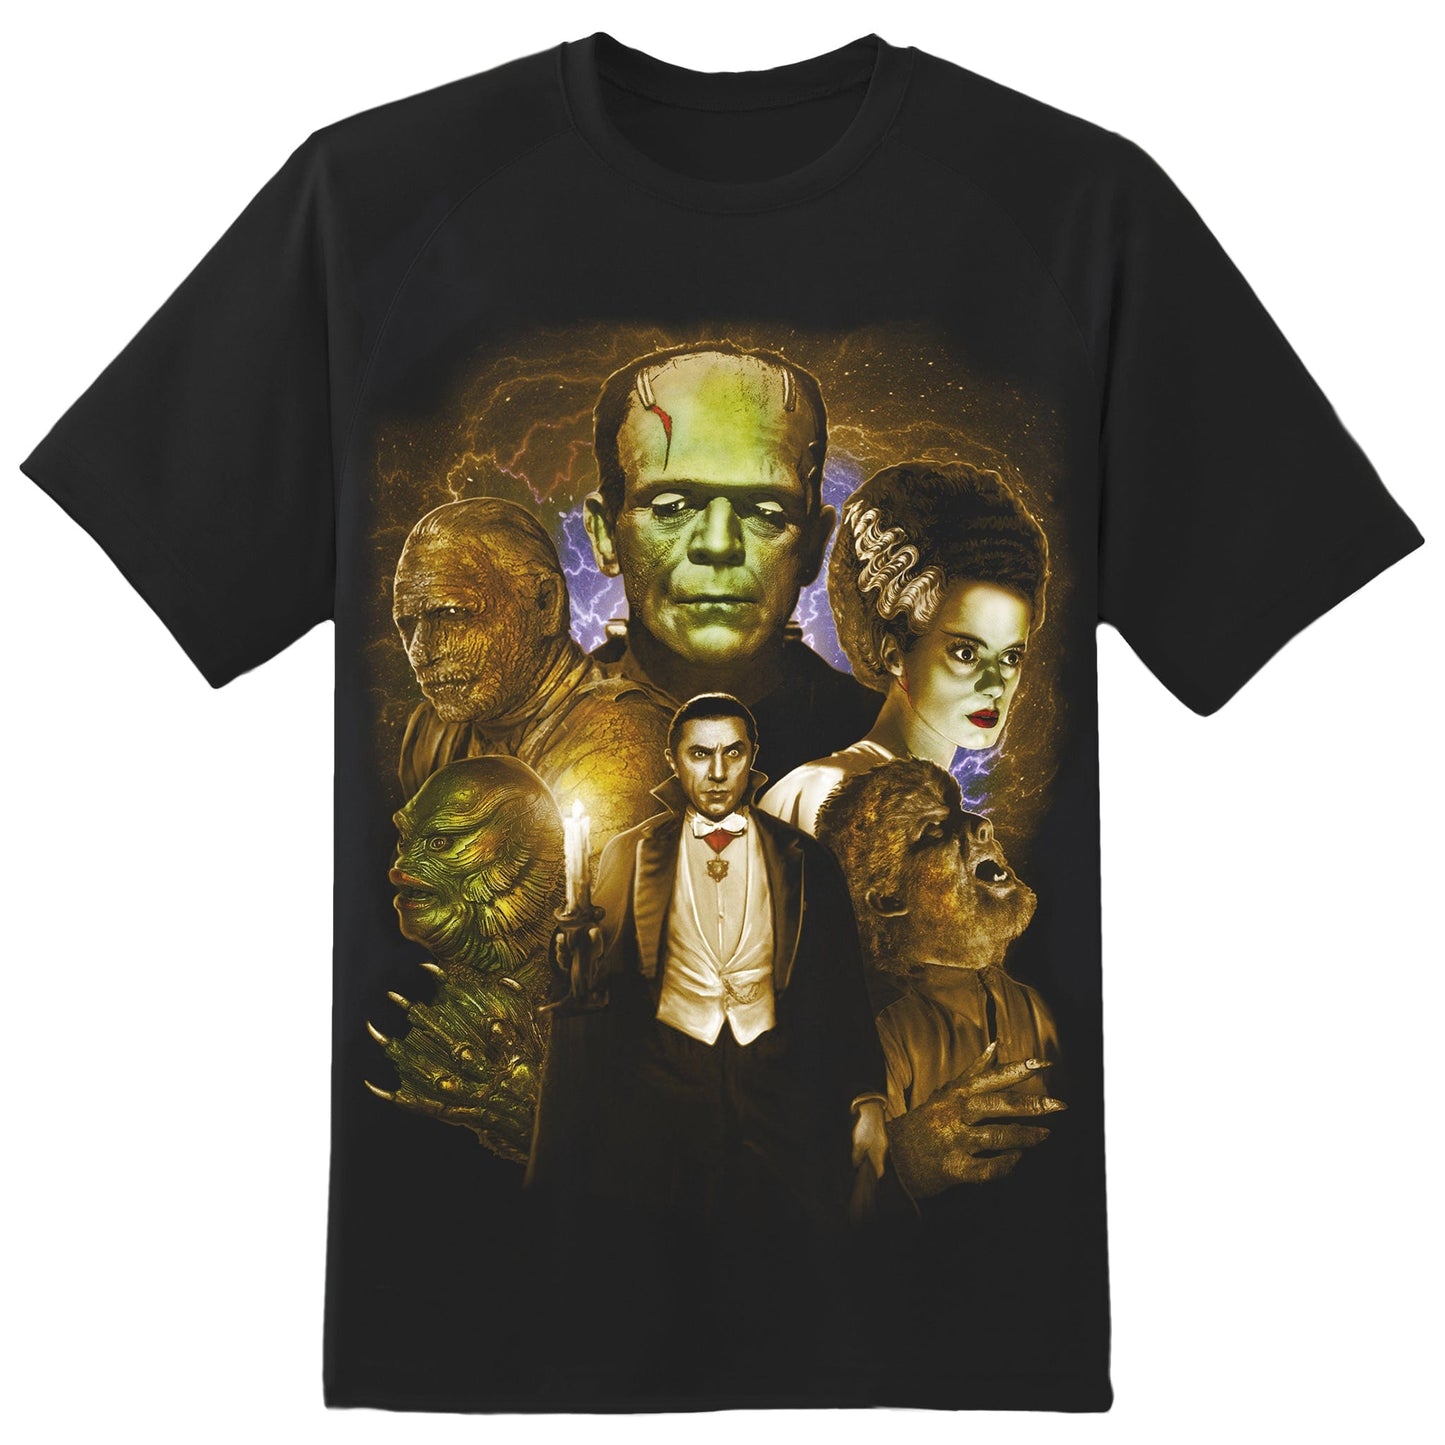 Universal Monsters Full Color Collage Tee